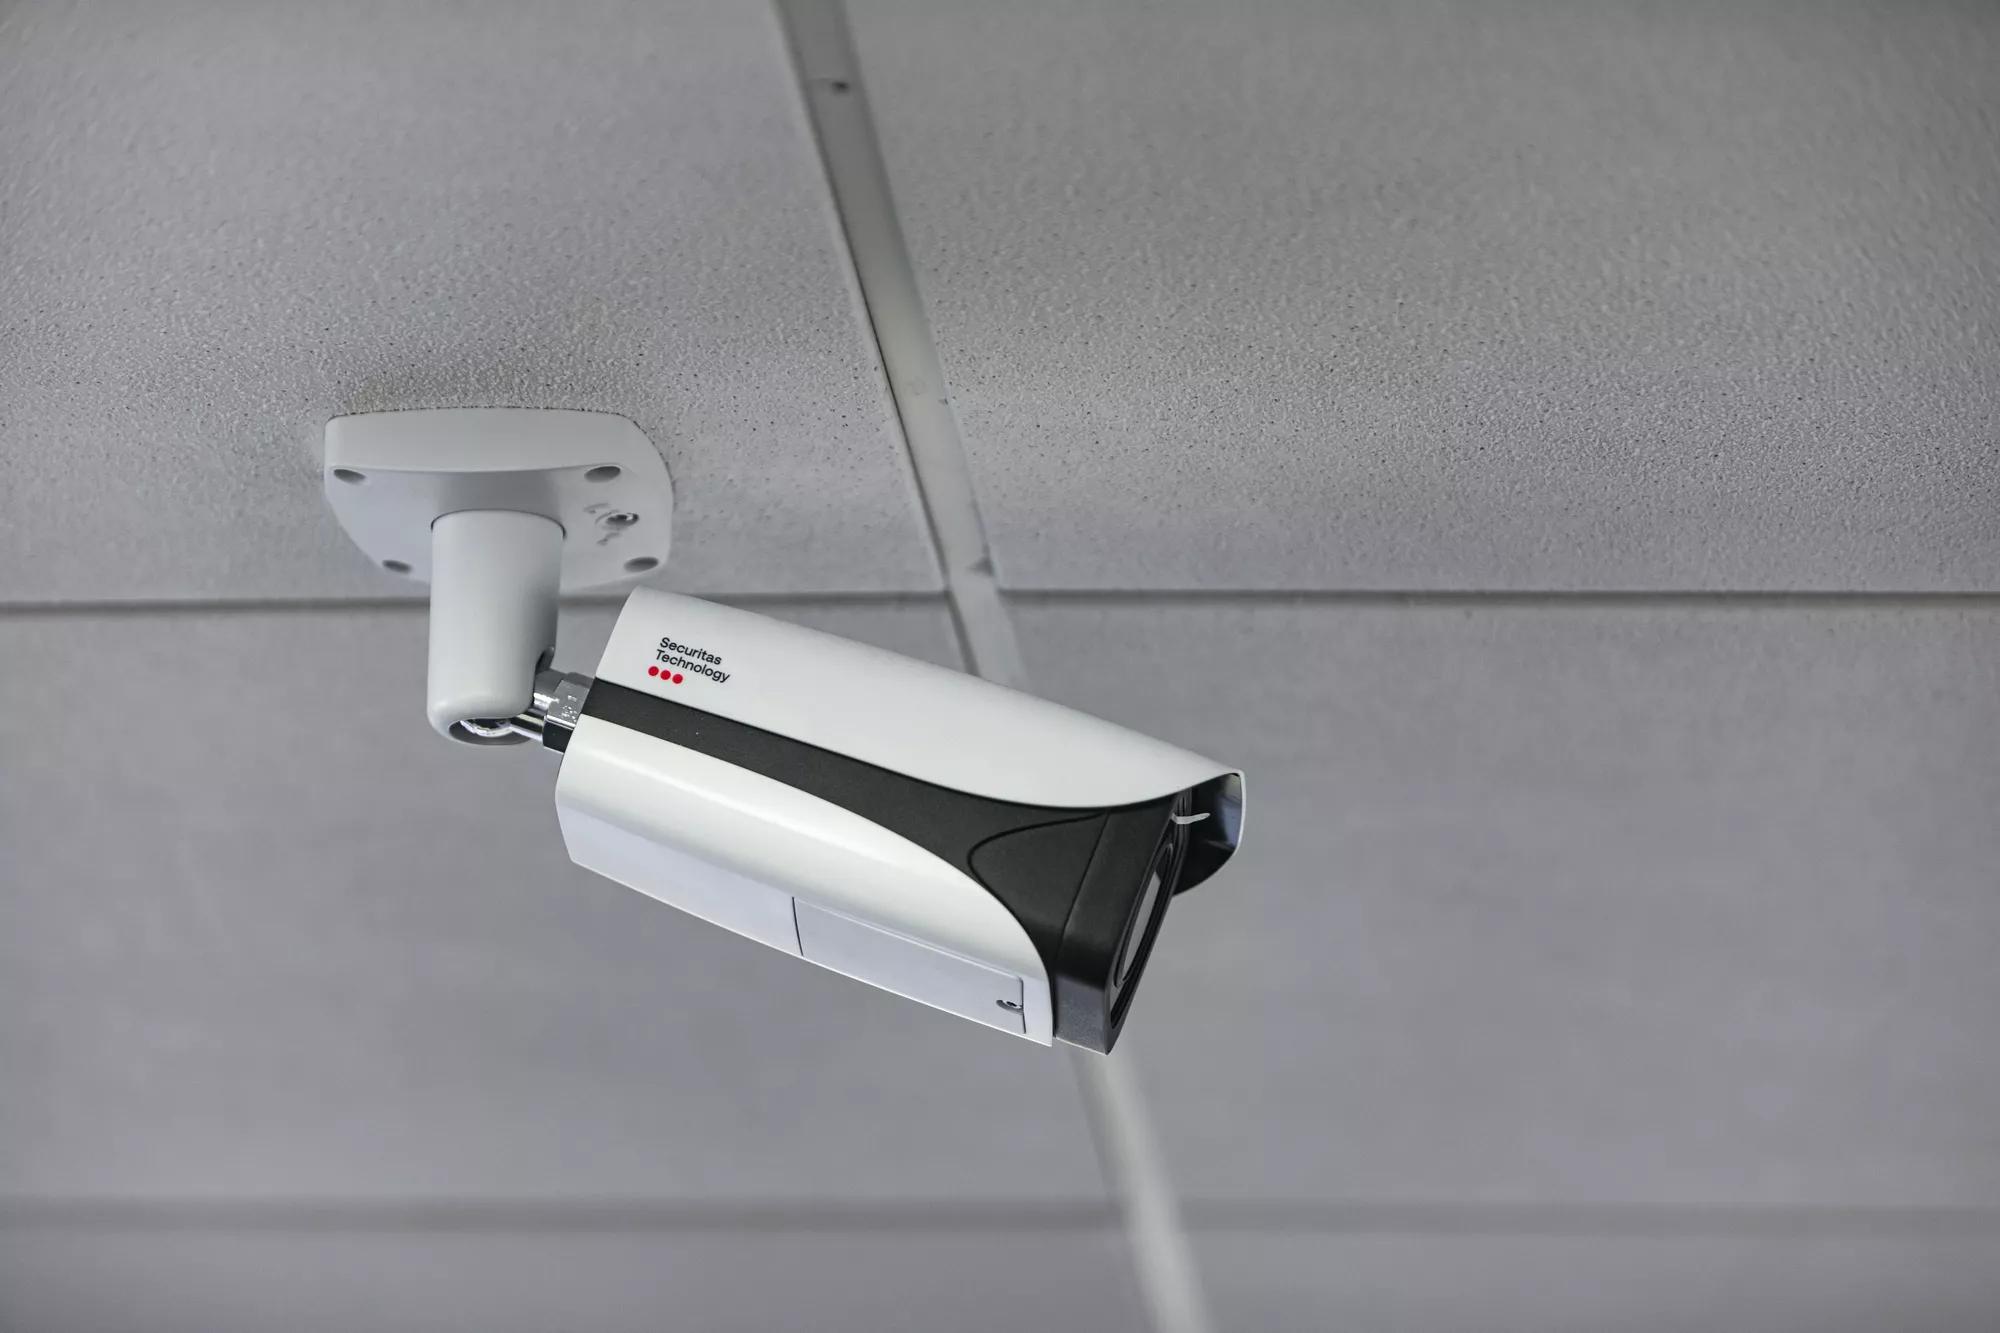 SecTech_2023_FR_Security Camera on Ceiling_May 2023-1502